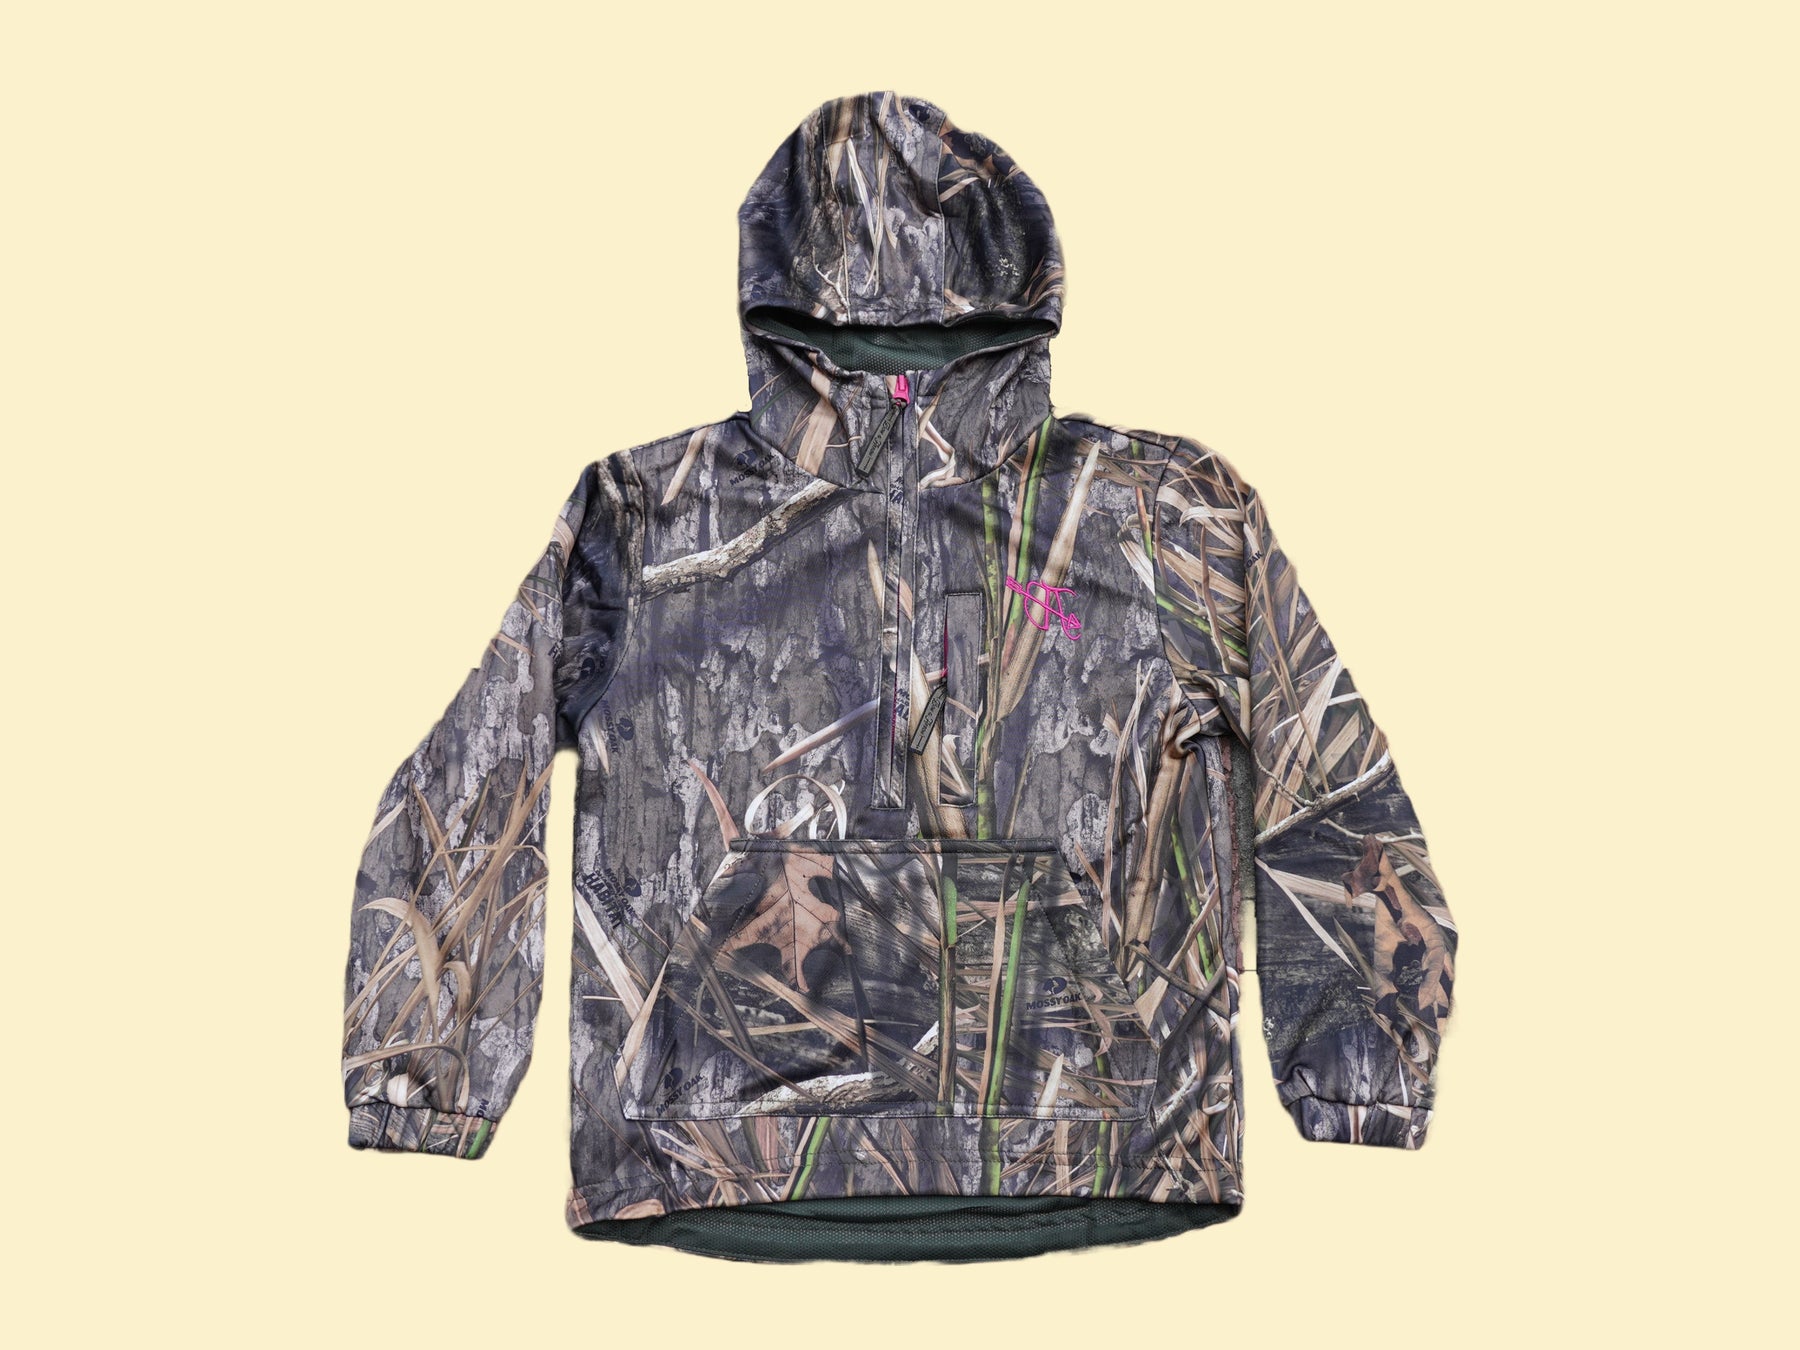 Quarter Zip Pullover by Bow and Arrow Outdoors - Sportsman Gear